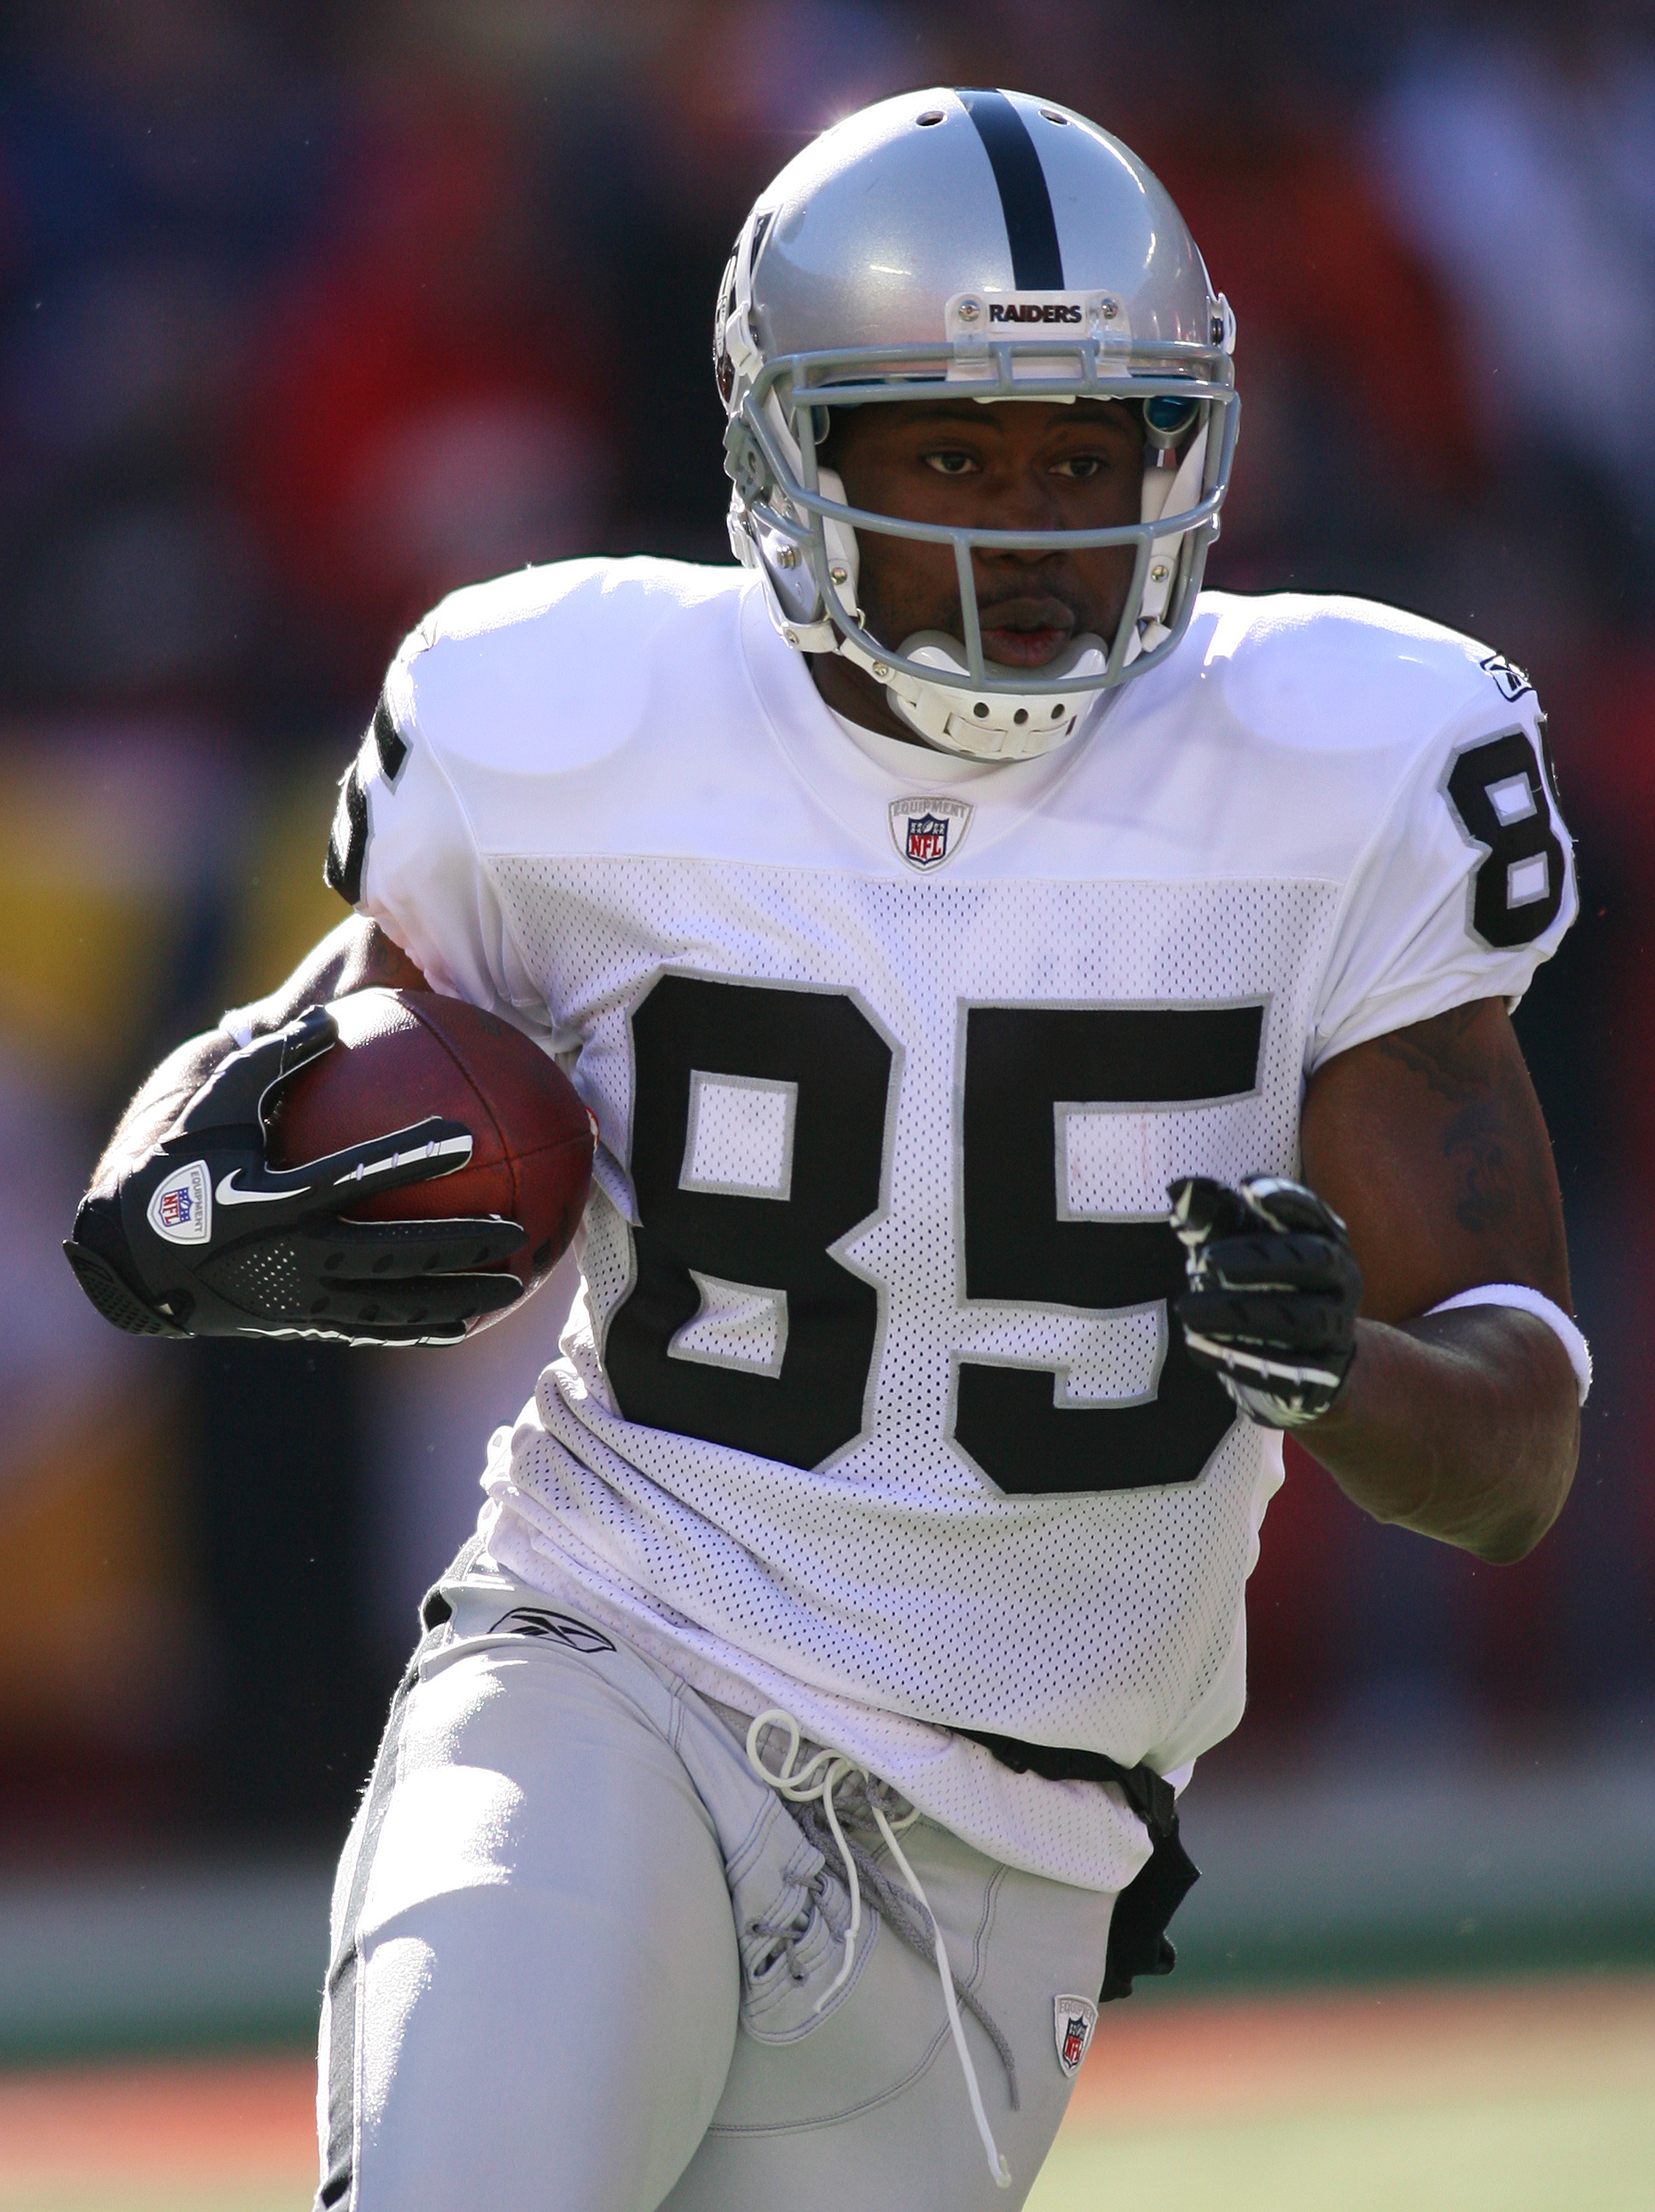 KANSAS CITY, MO - JANUARY 02:  Wide receiver Darrius Heyward-Bey #85 of the Oakland Raiders runs down field in a game against the Kansas City Chiefs at Arrowhead Stadium on January 2, 2011 in Kansas City, Missouri.  (Photo by Tim Umphrey/Getty Images)